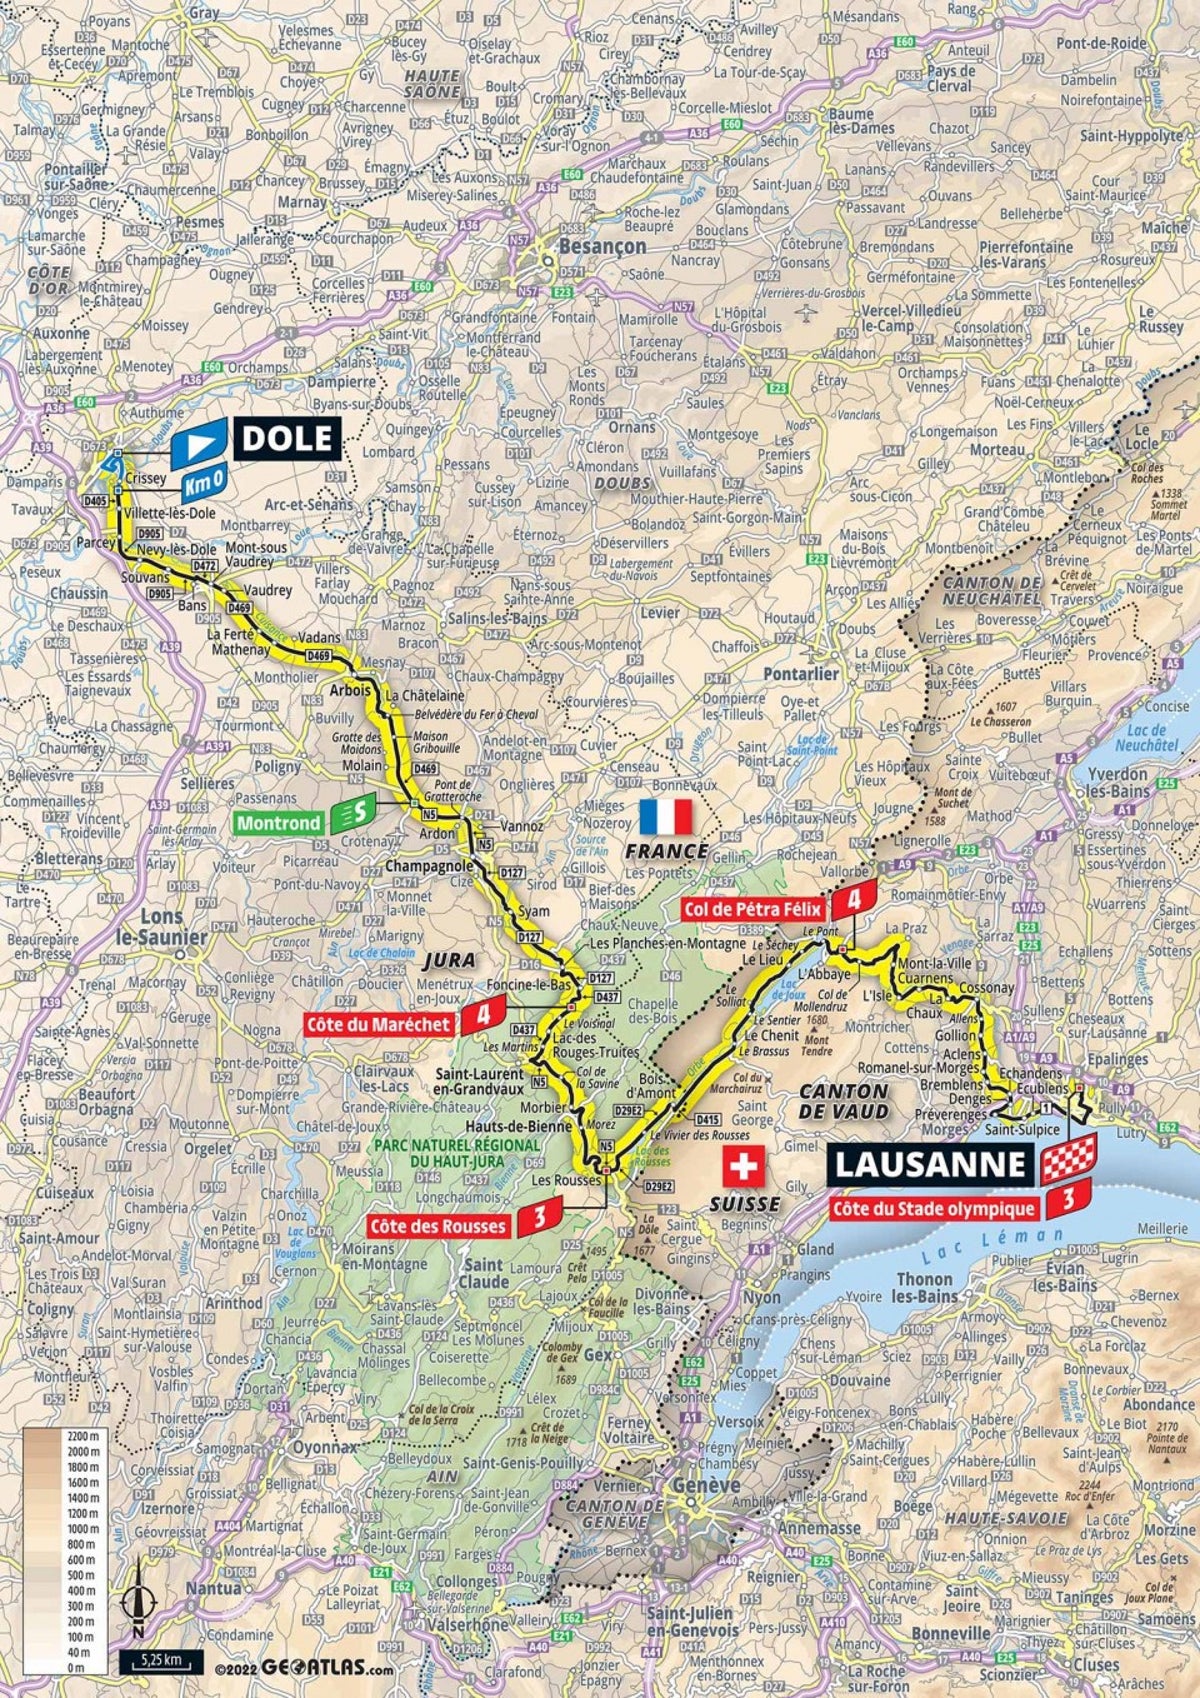 Tour de France 2022 stage 8 preview: Route map and profile of 186km road from Dole to Lausanne today